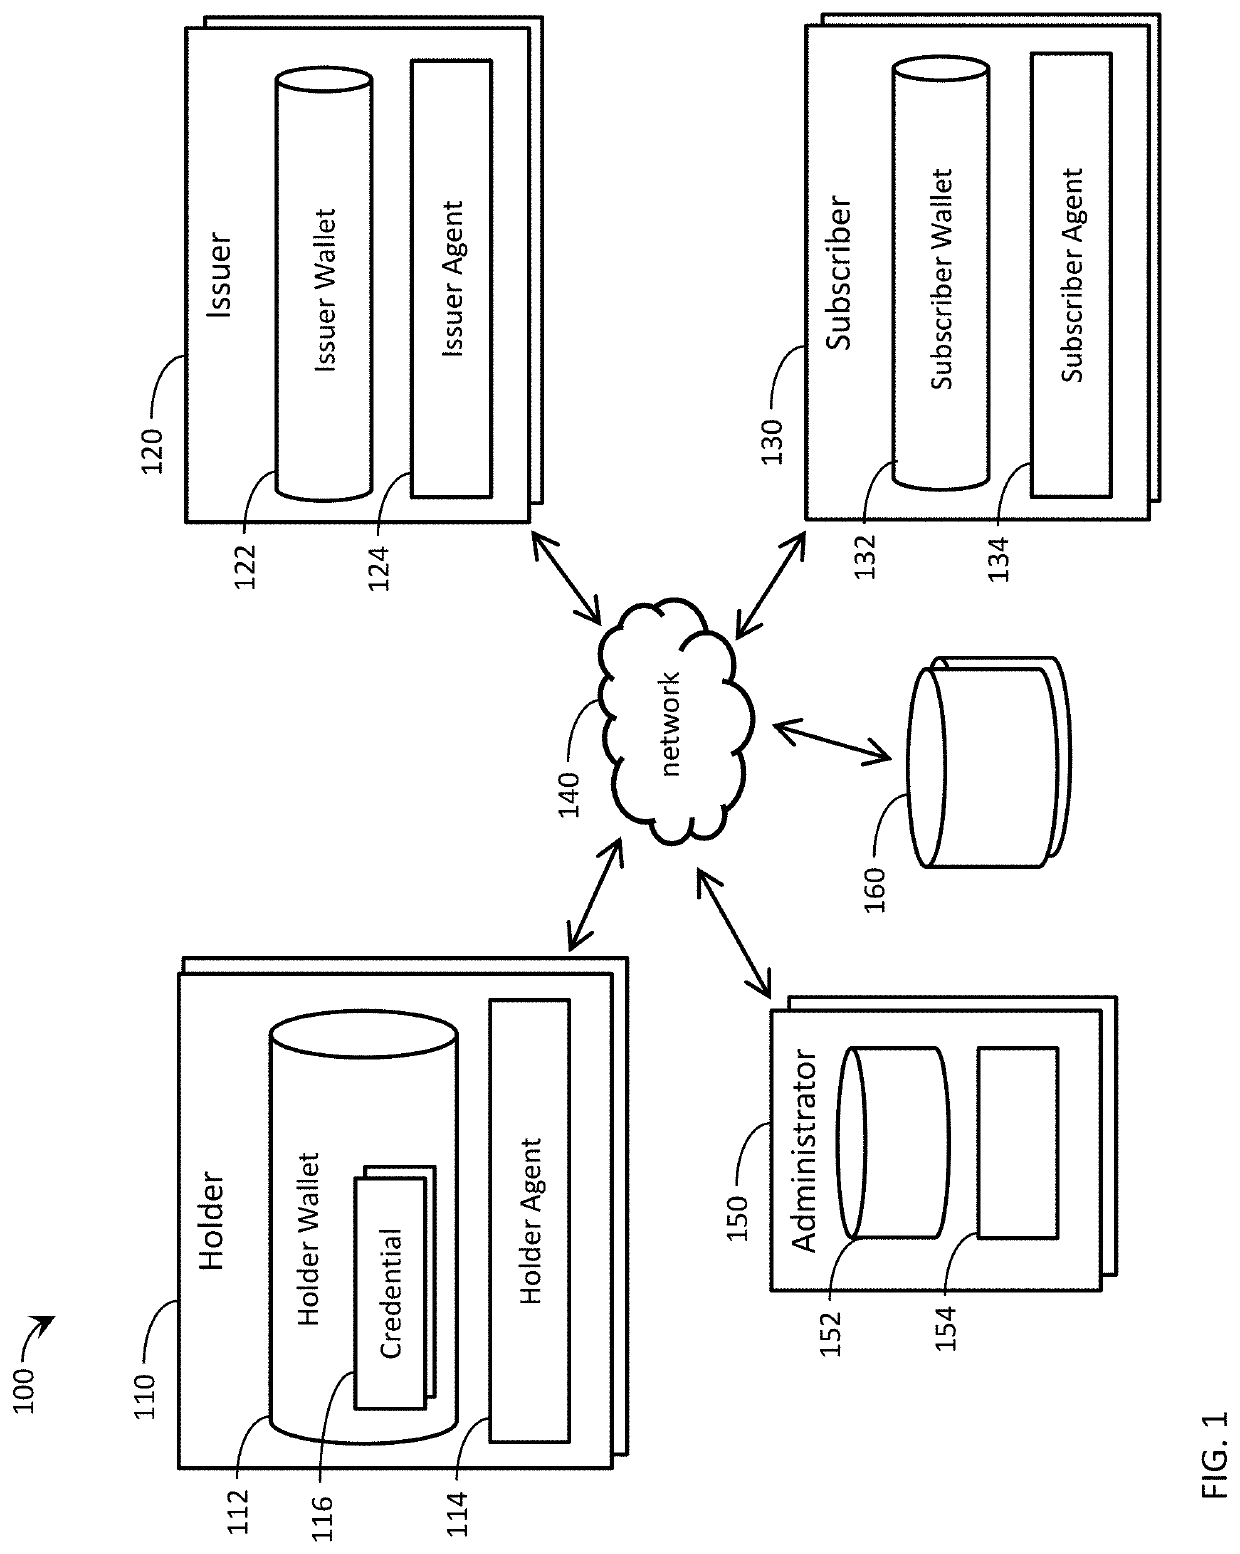 Systems and methods for verifying and managing digital credentials